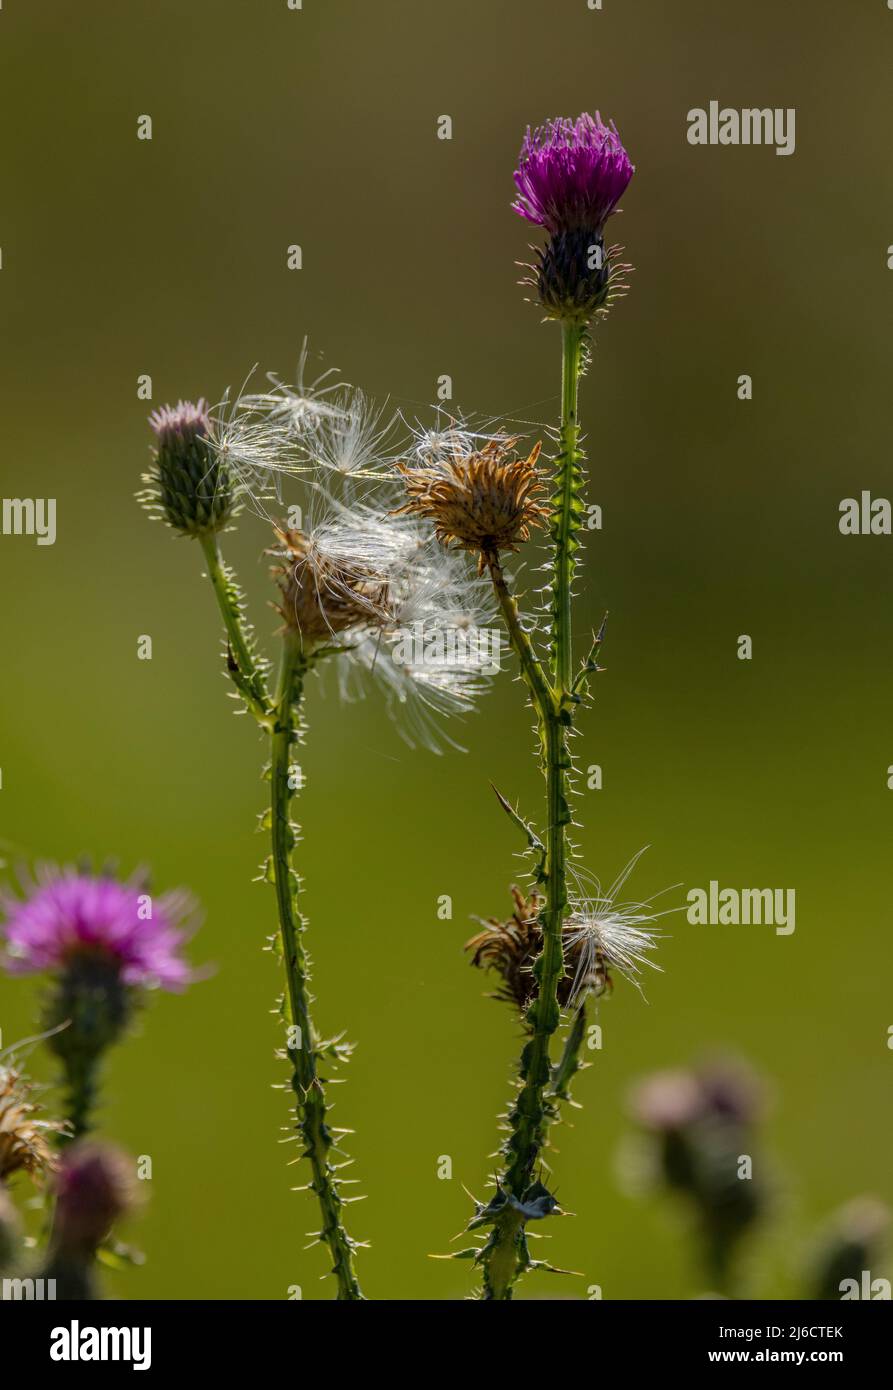 Carduus crispus, Carduus acanthoides in flower and fruit, with thistledown. Stock Photo